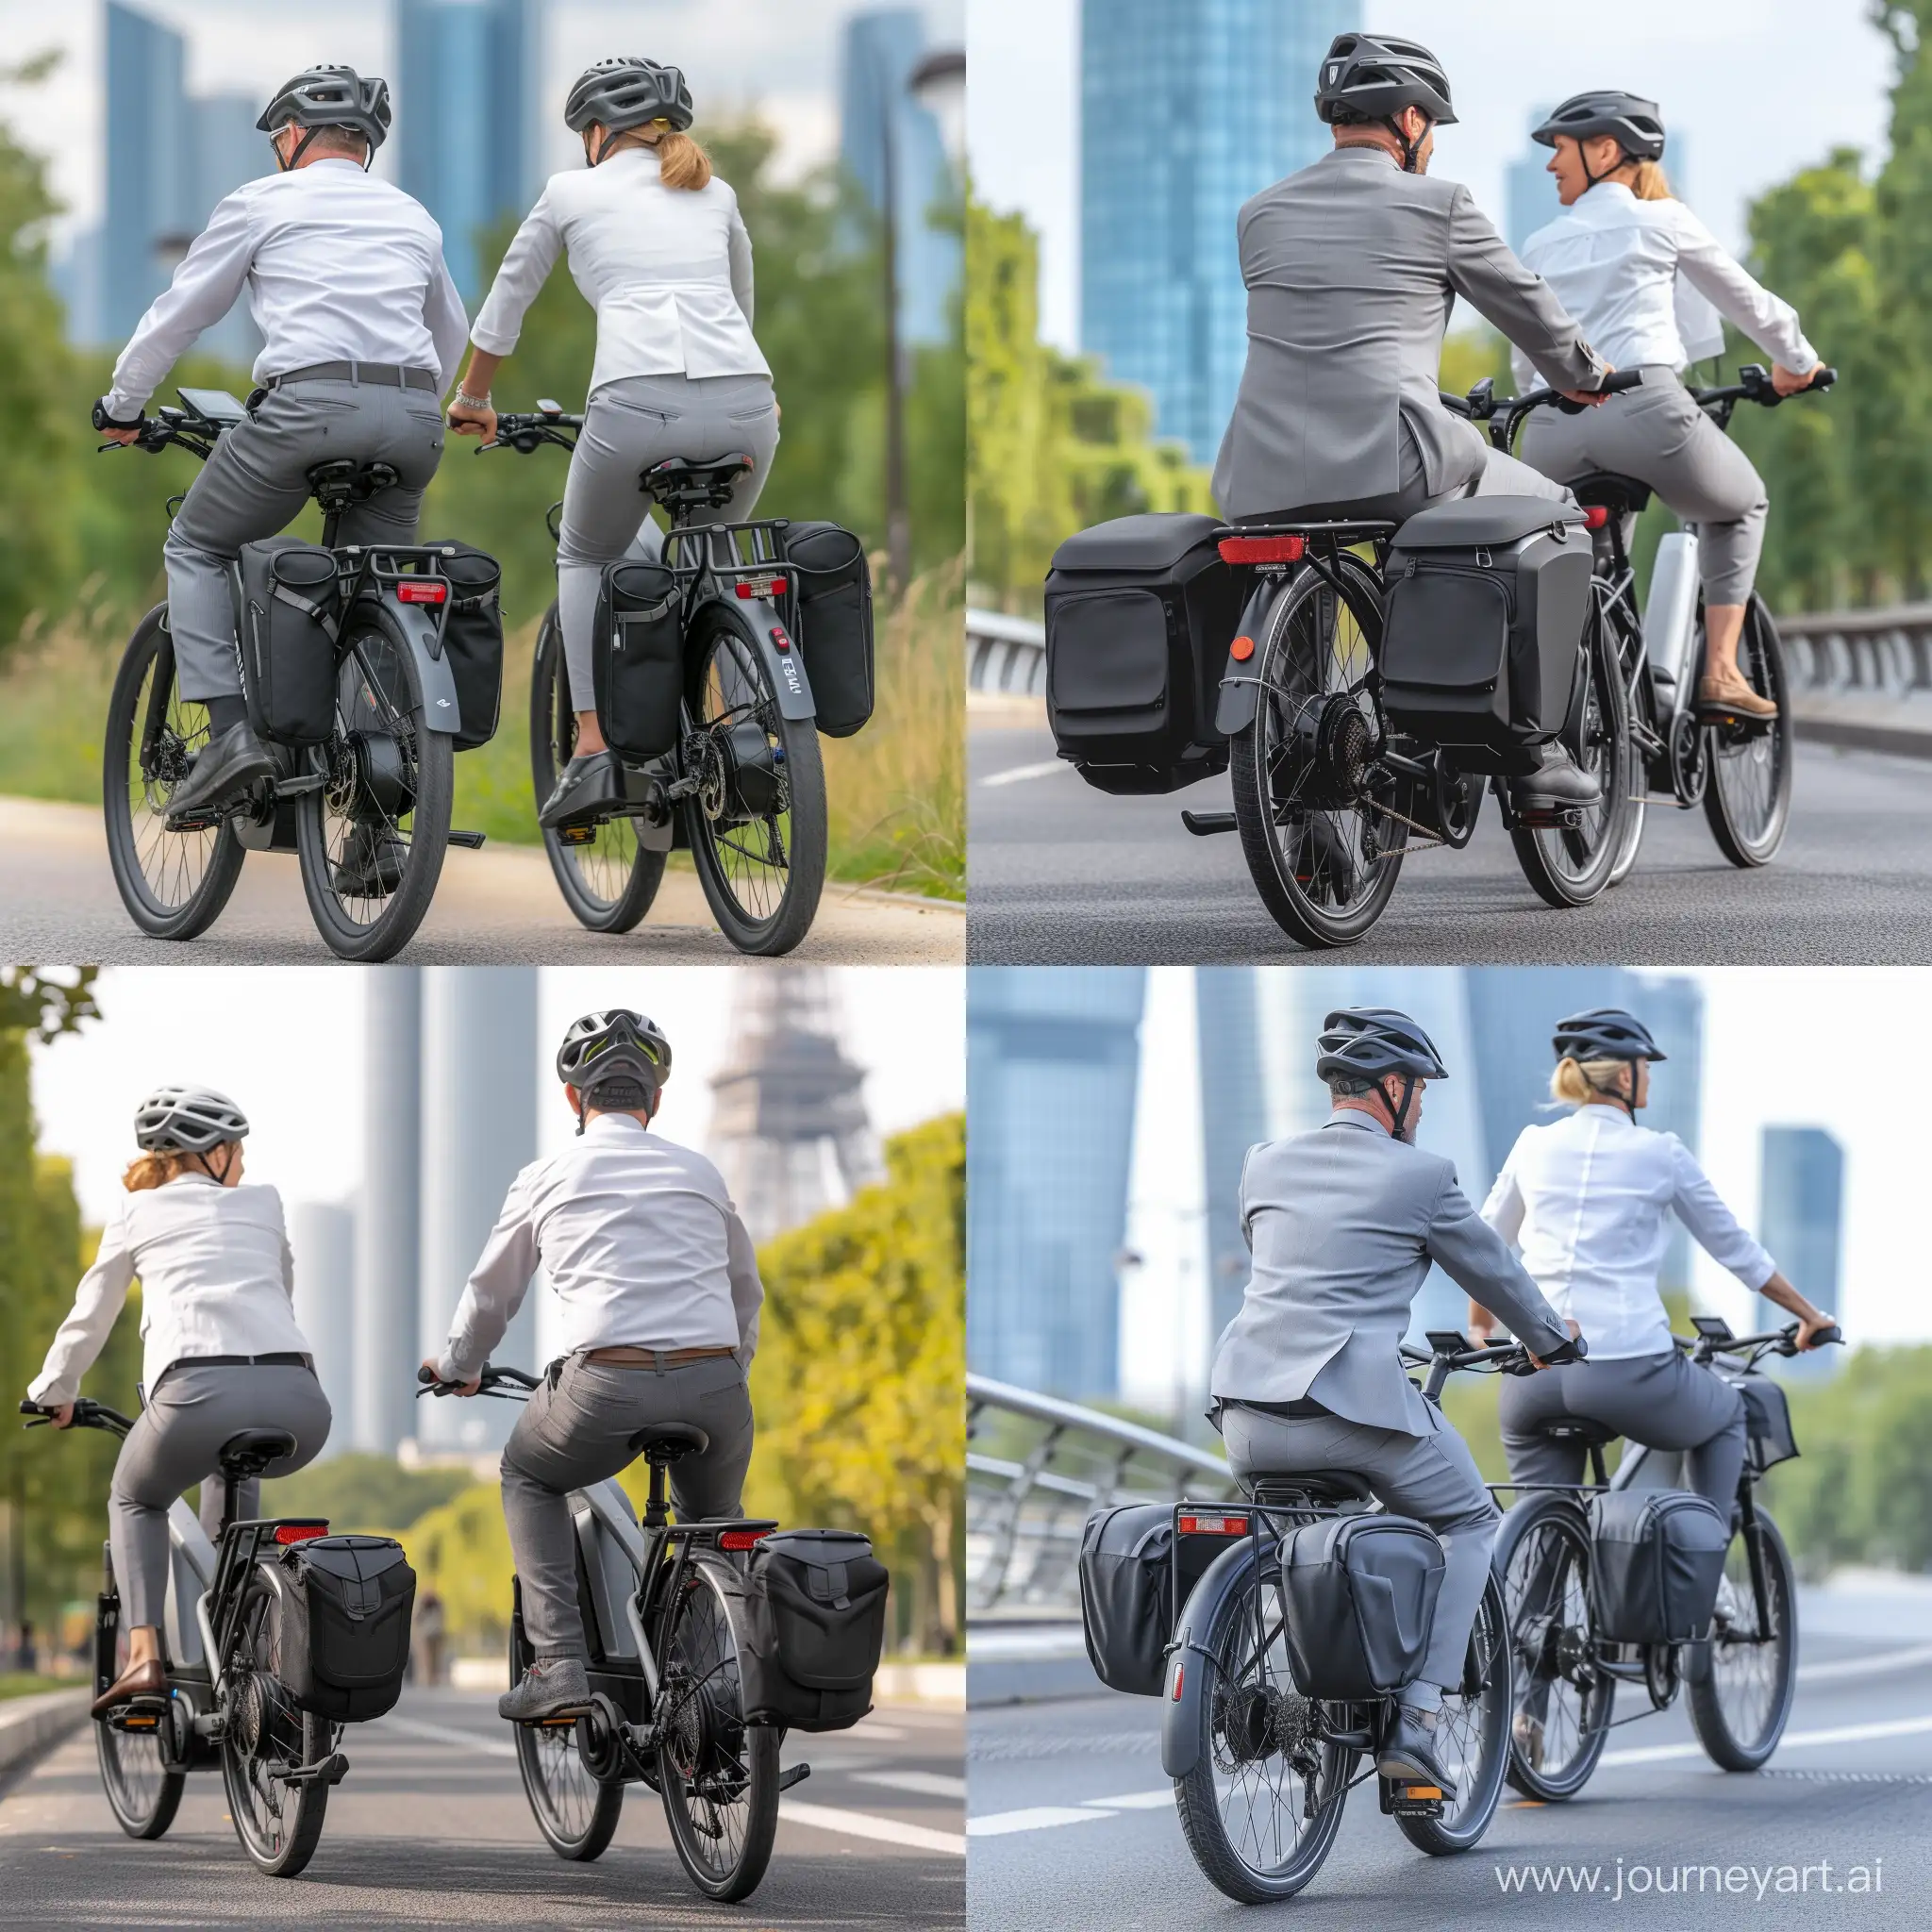 MiddleAged-Couple-Commuting-on-Electric-Bikes-to-La-Dfense-Towers-Paris